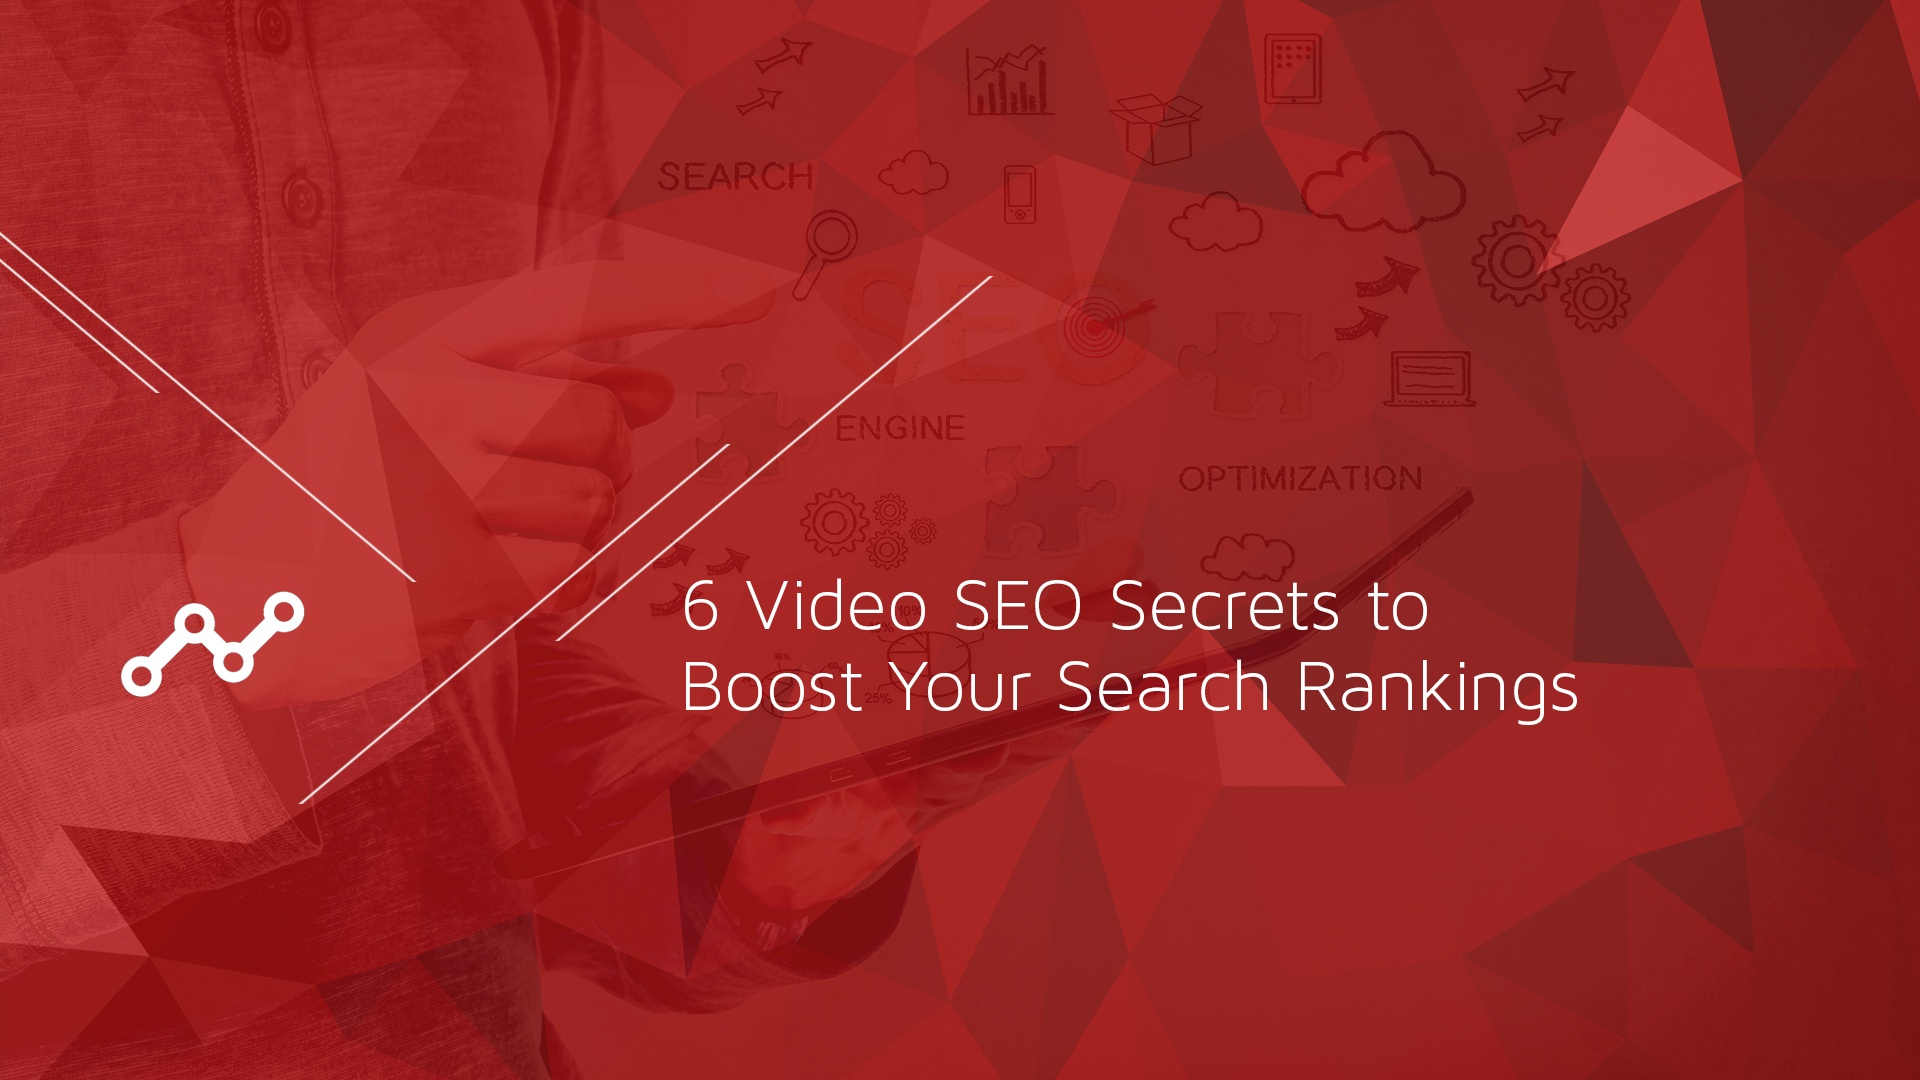 1 - 6 Video SEO Secrets to Boost Your Search Rankings-1.jpg